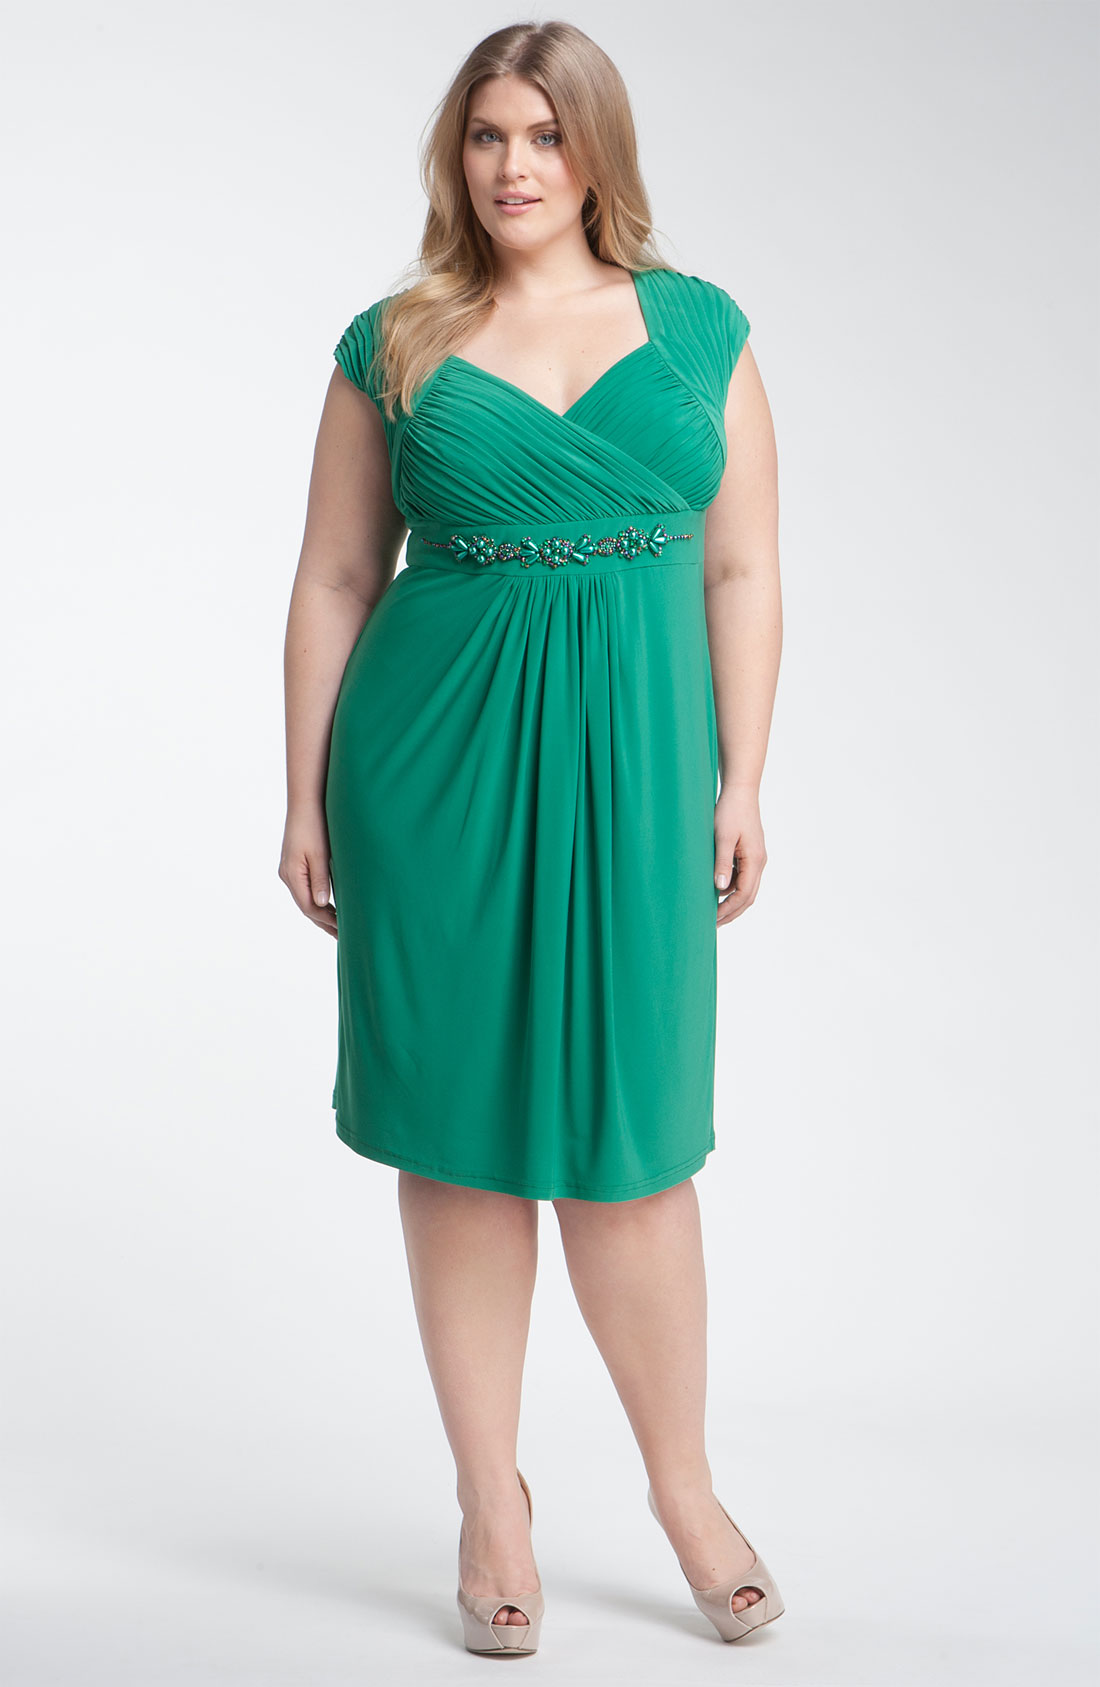 Adrianna Papell Embellished Cap Sleeve Dress in Green (kelly) | Lyst